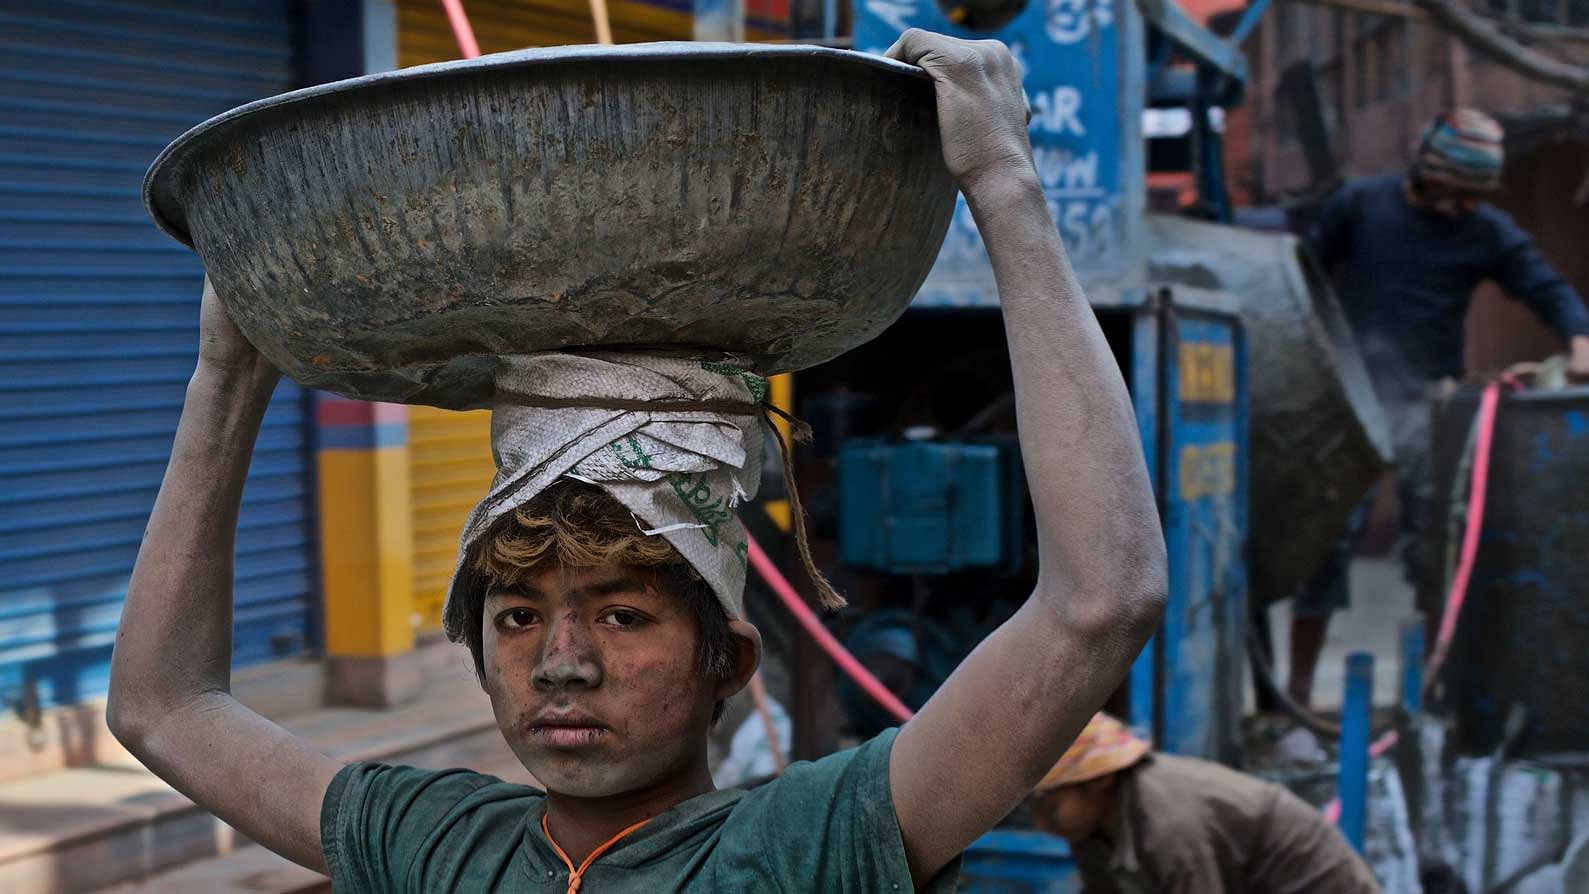 A visible  effect of the pandemic is an increased risk of child labour.